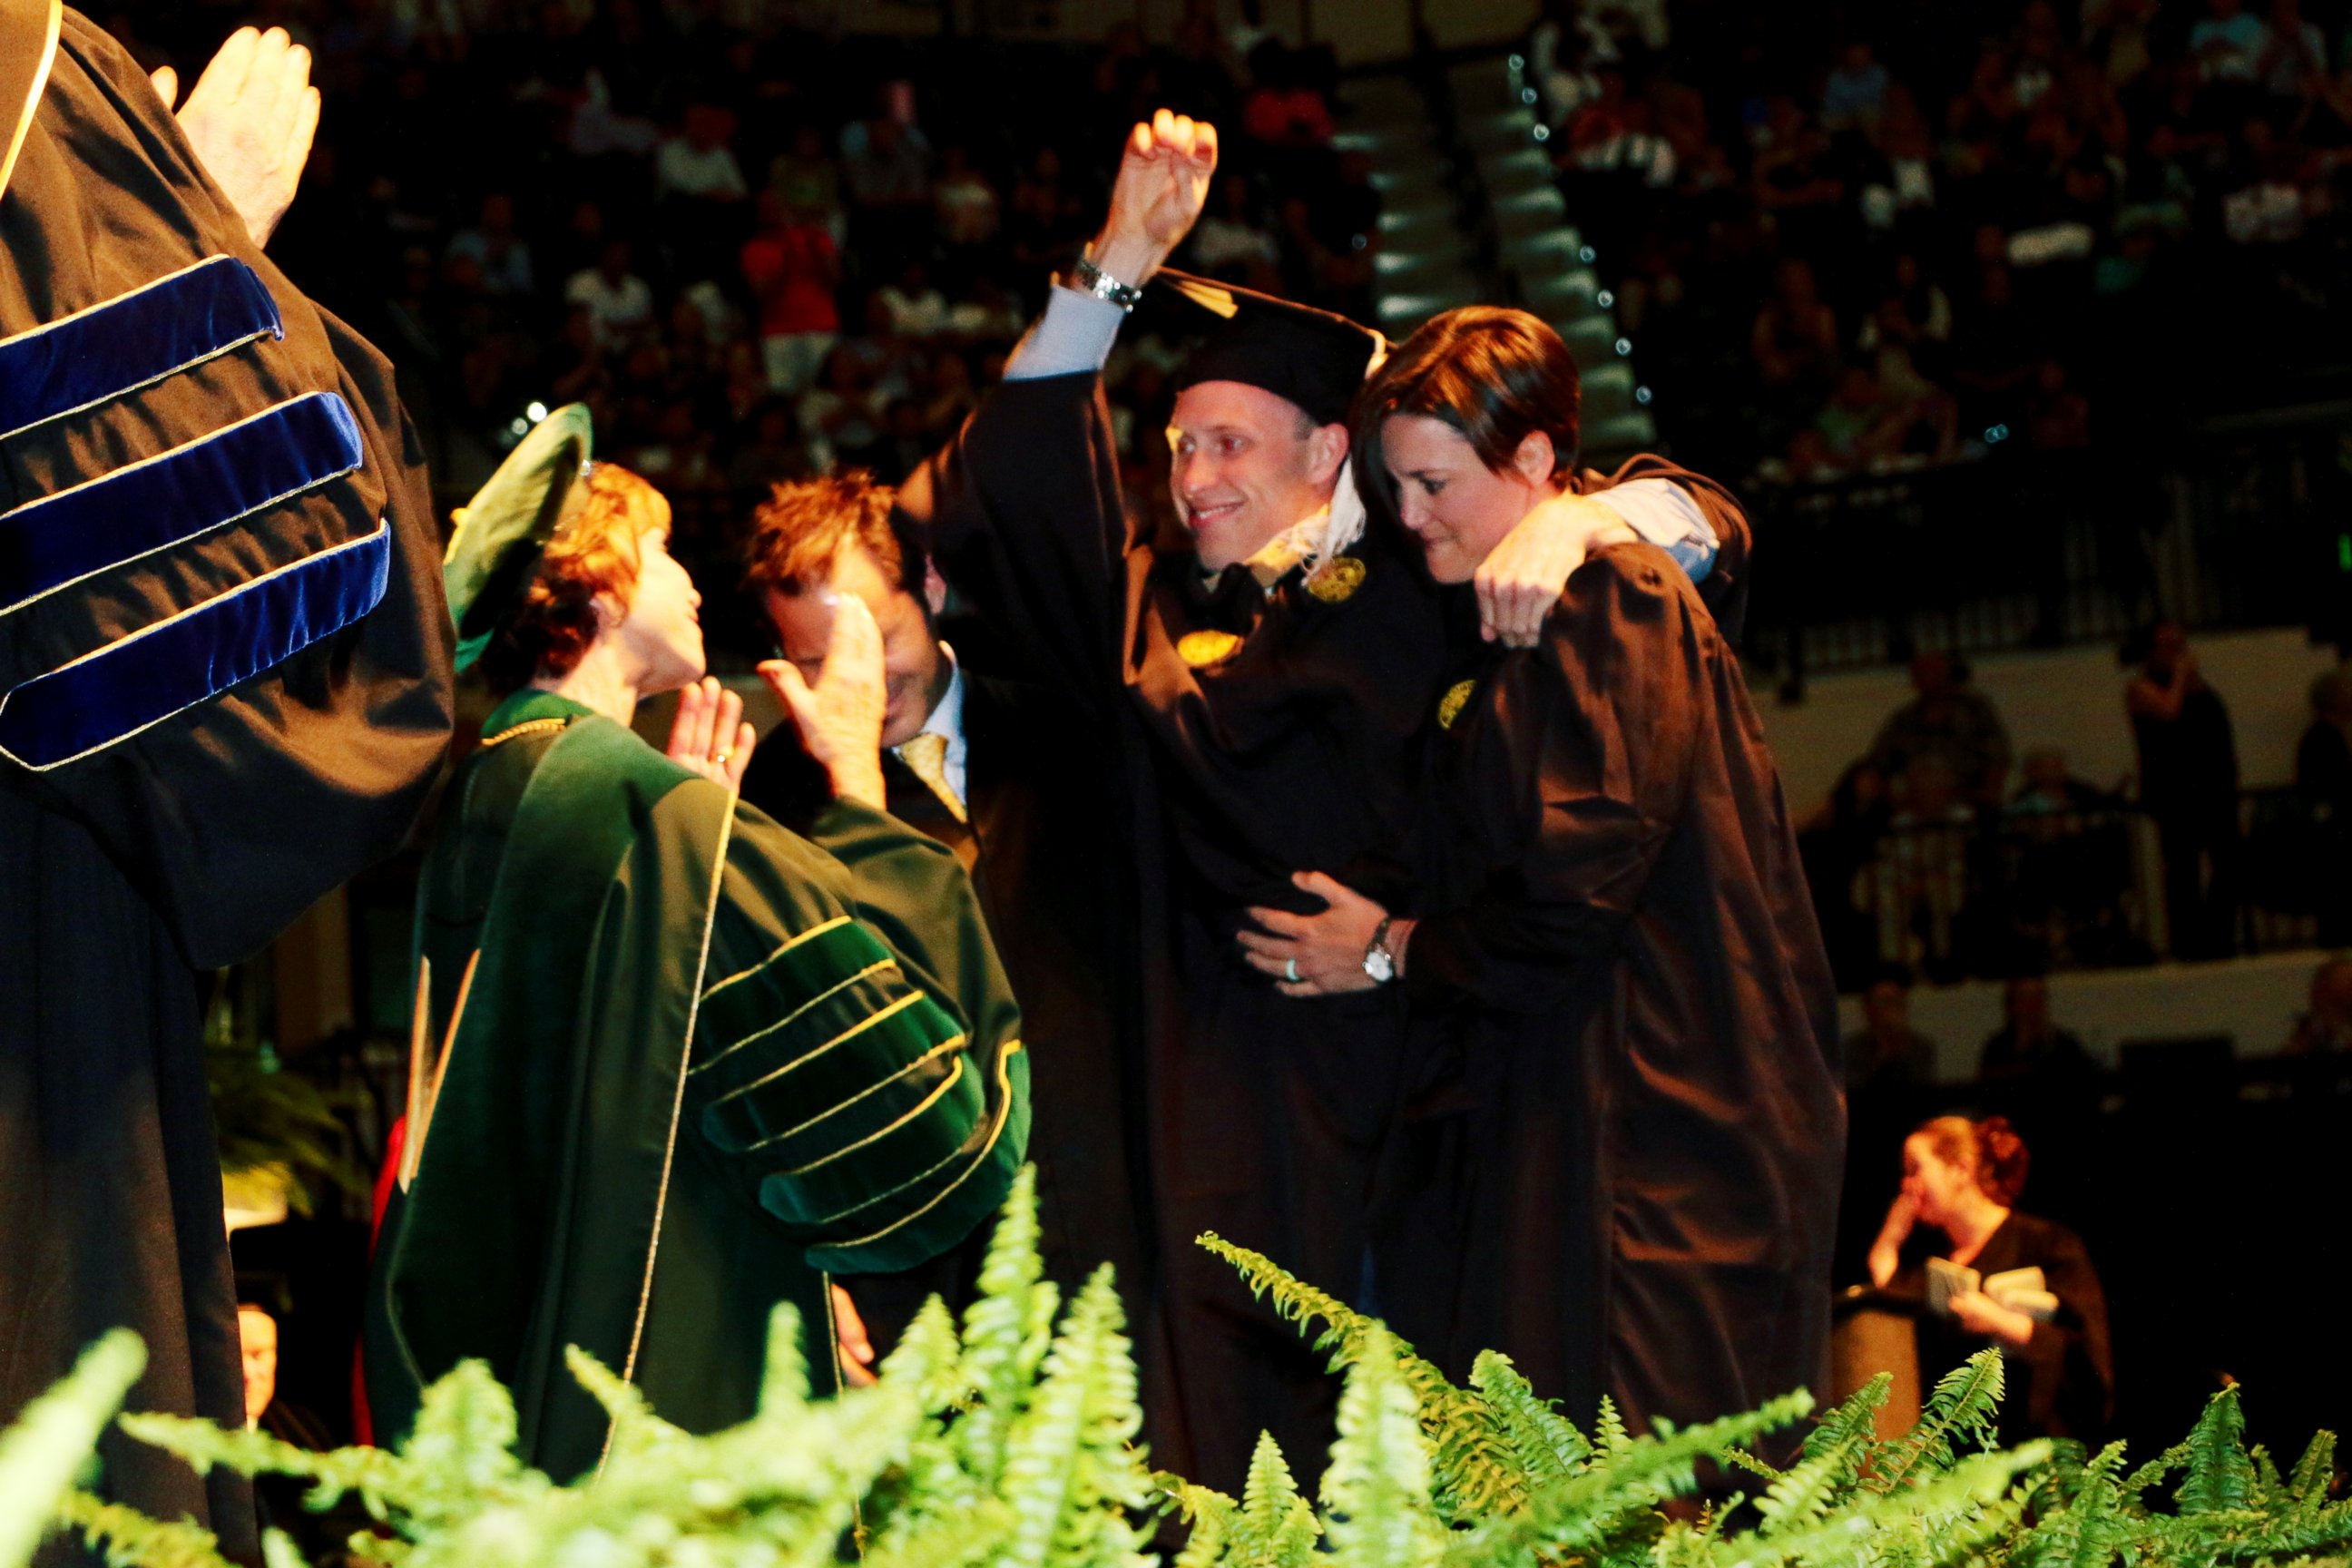 PHOTO: Sam Bridgman stood up with the help of two friends and physical trainers to walk across the graduation stage at USF, May 7, 2017.